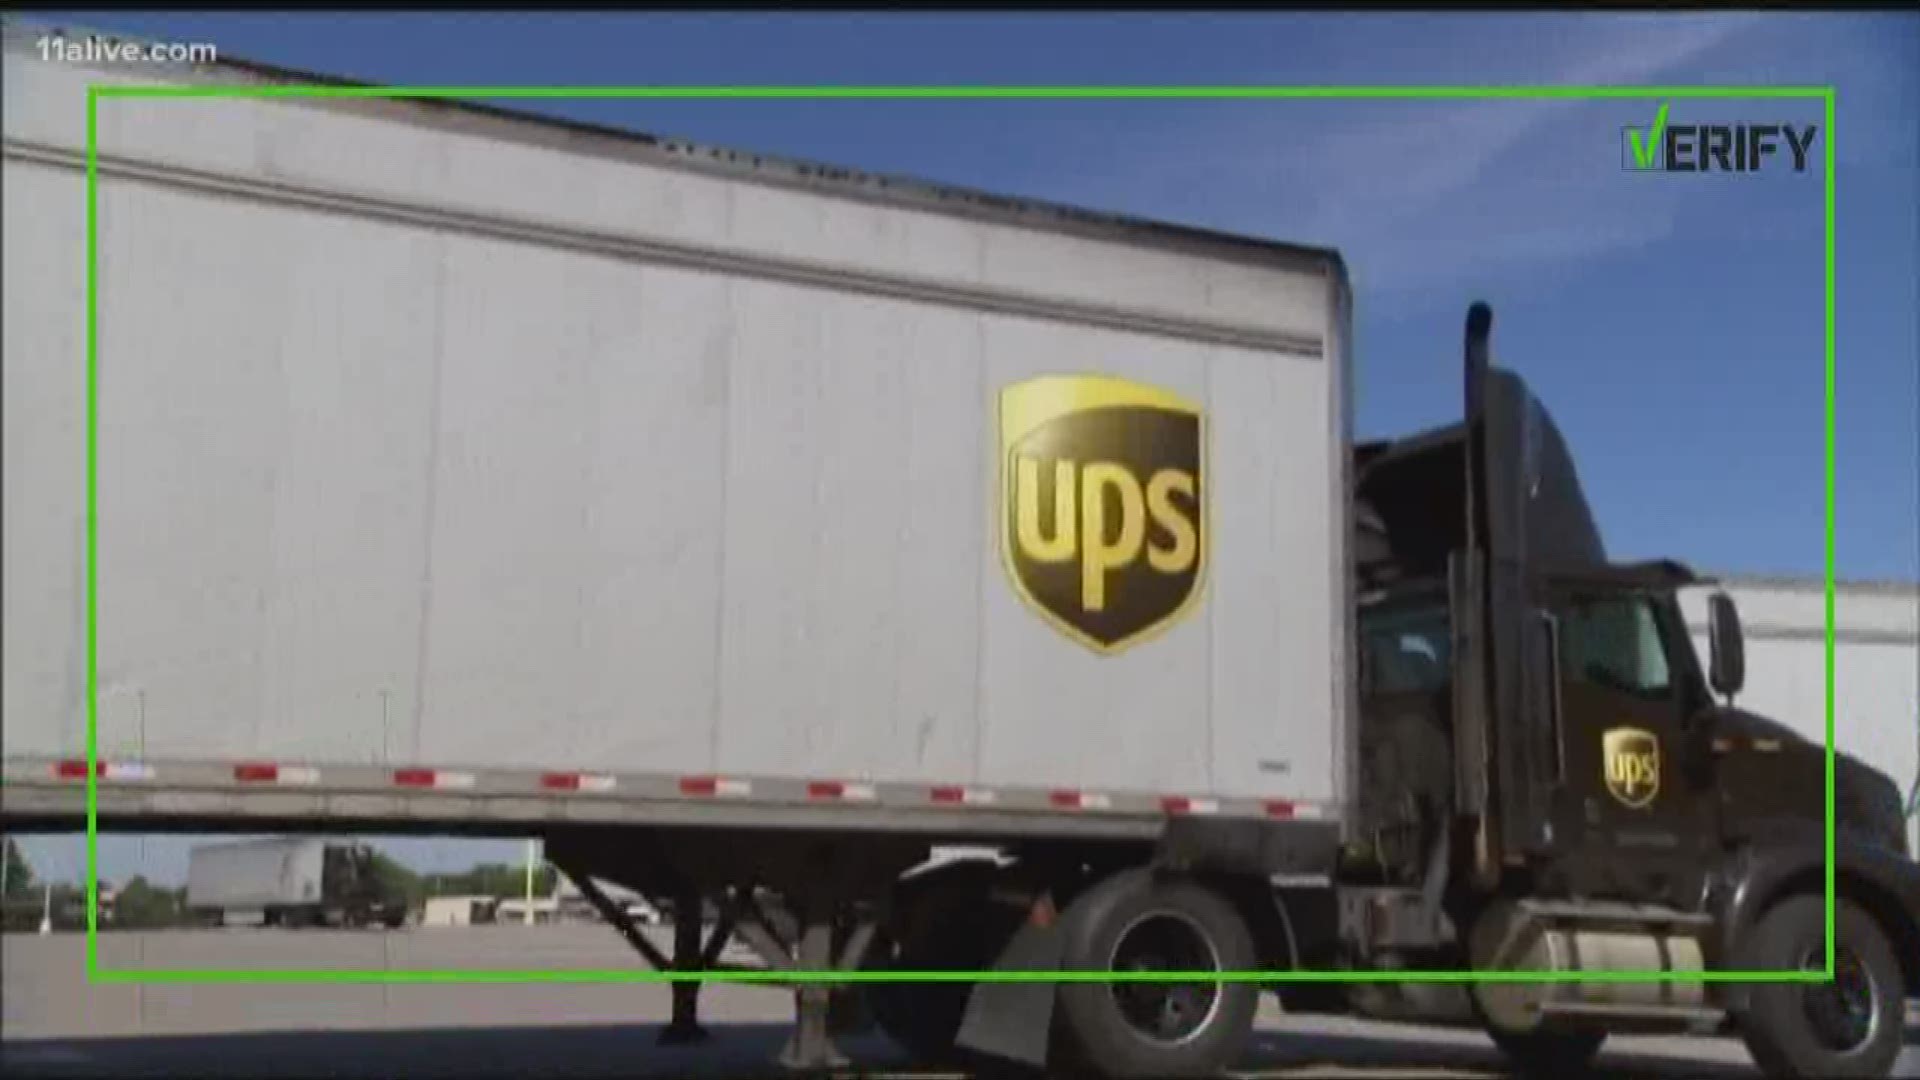 Is it true that UPS allow their drivers to use their personal cars to deliver packages? Chris Rogers verifies.